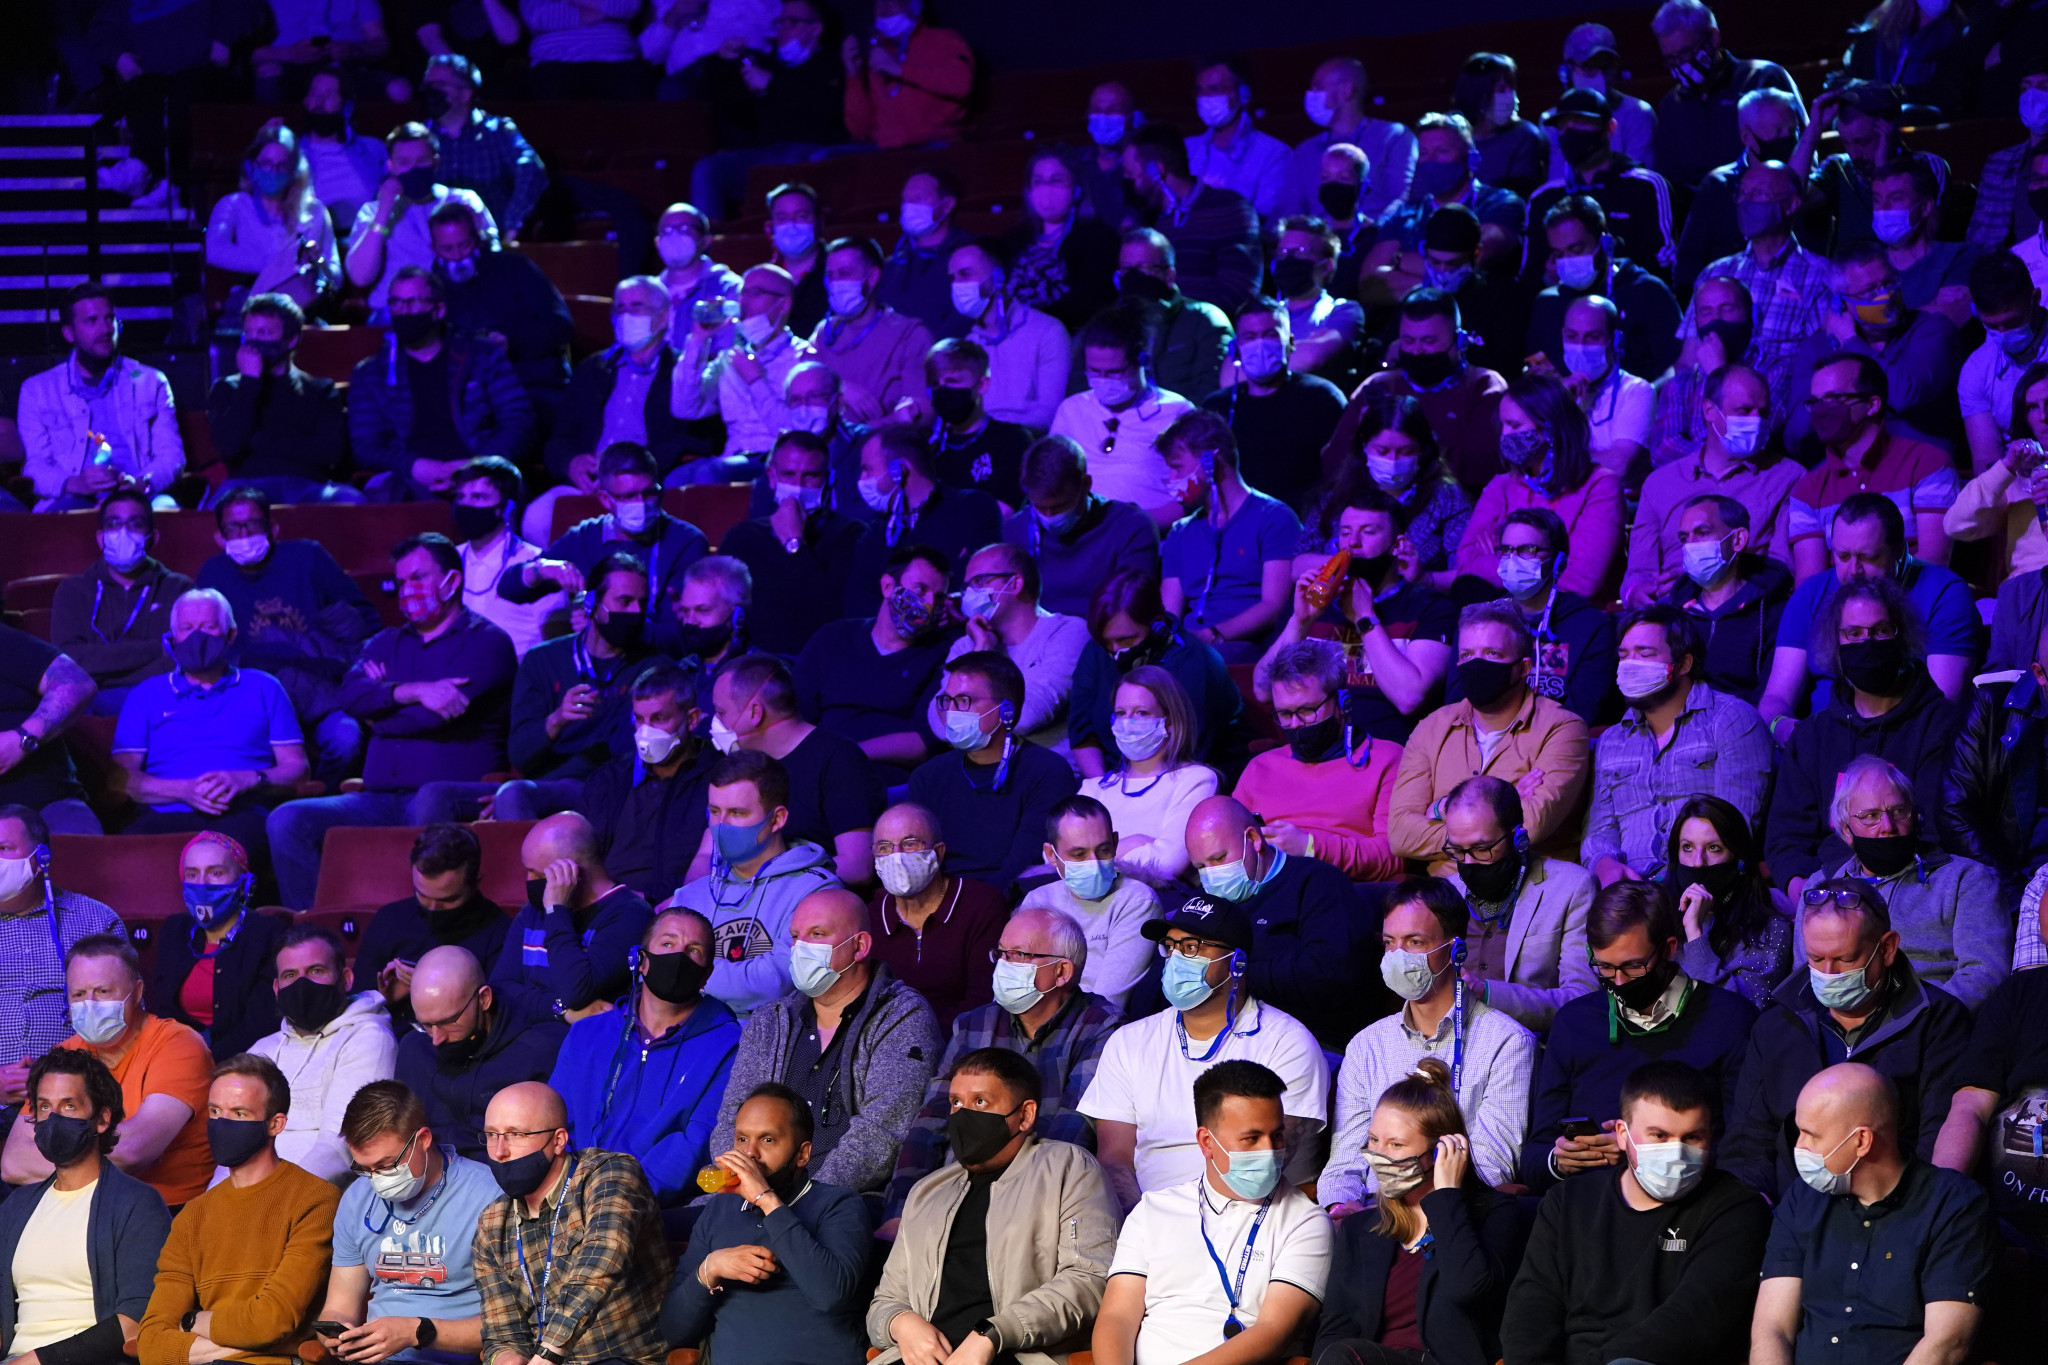 An estimated 600 fans took in the action at the Crucible Theatre today as part of a UK Government pilot project to look at the resumption of large-scale events ©Getty Images